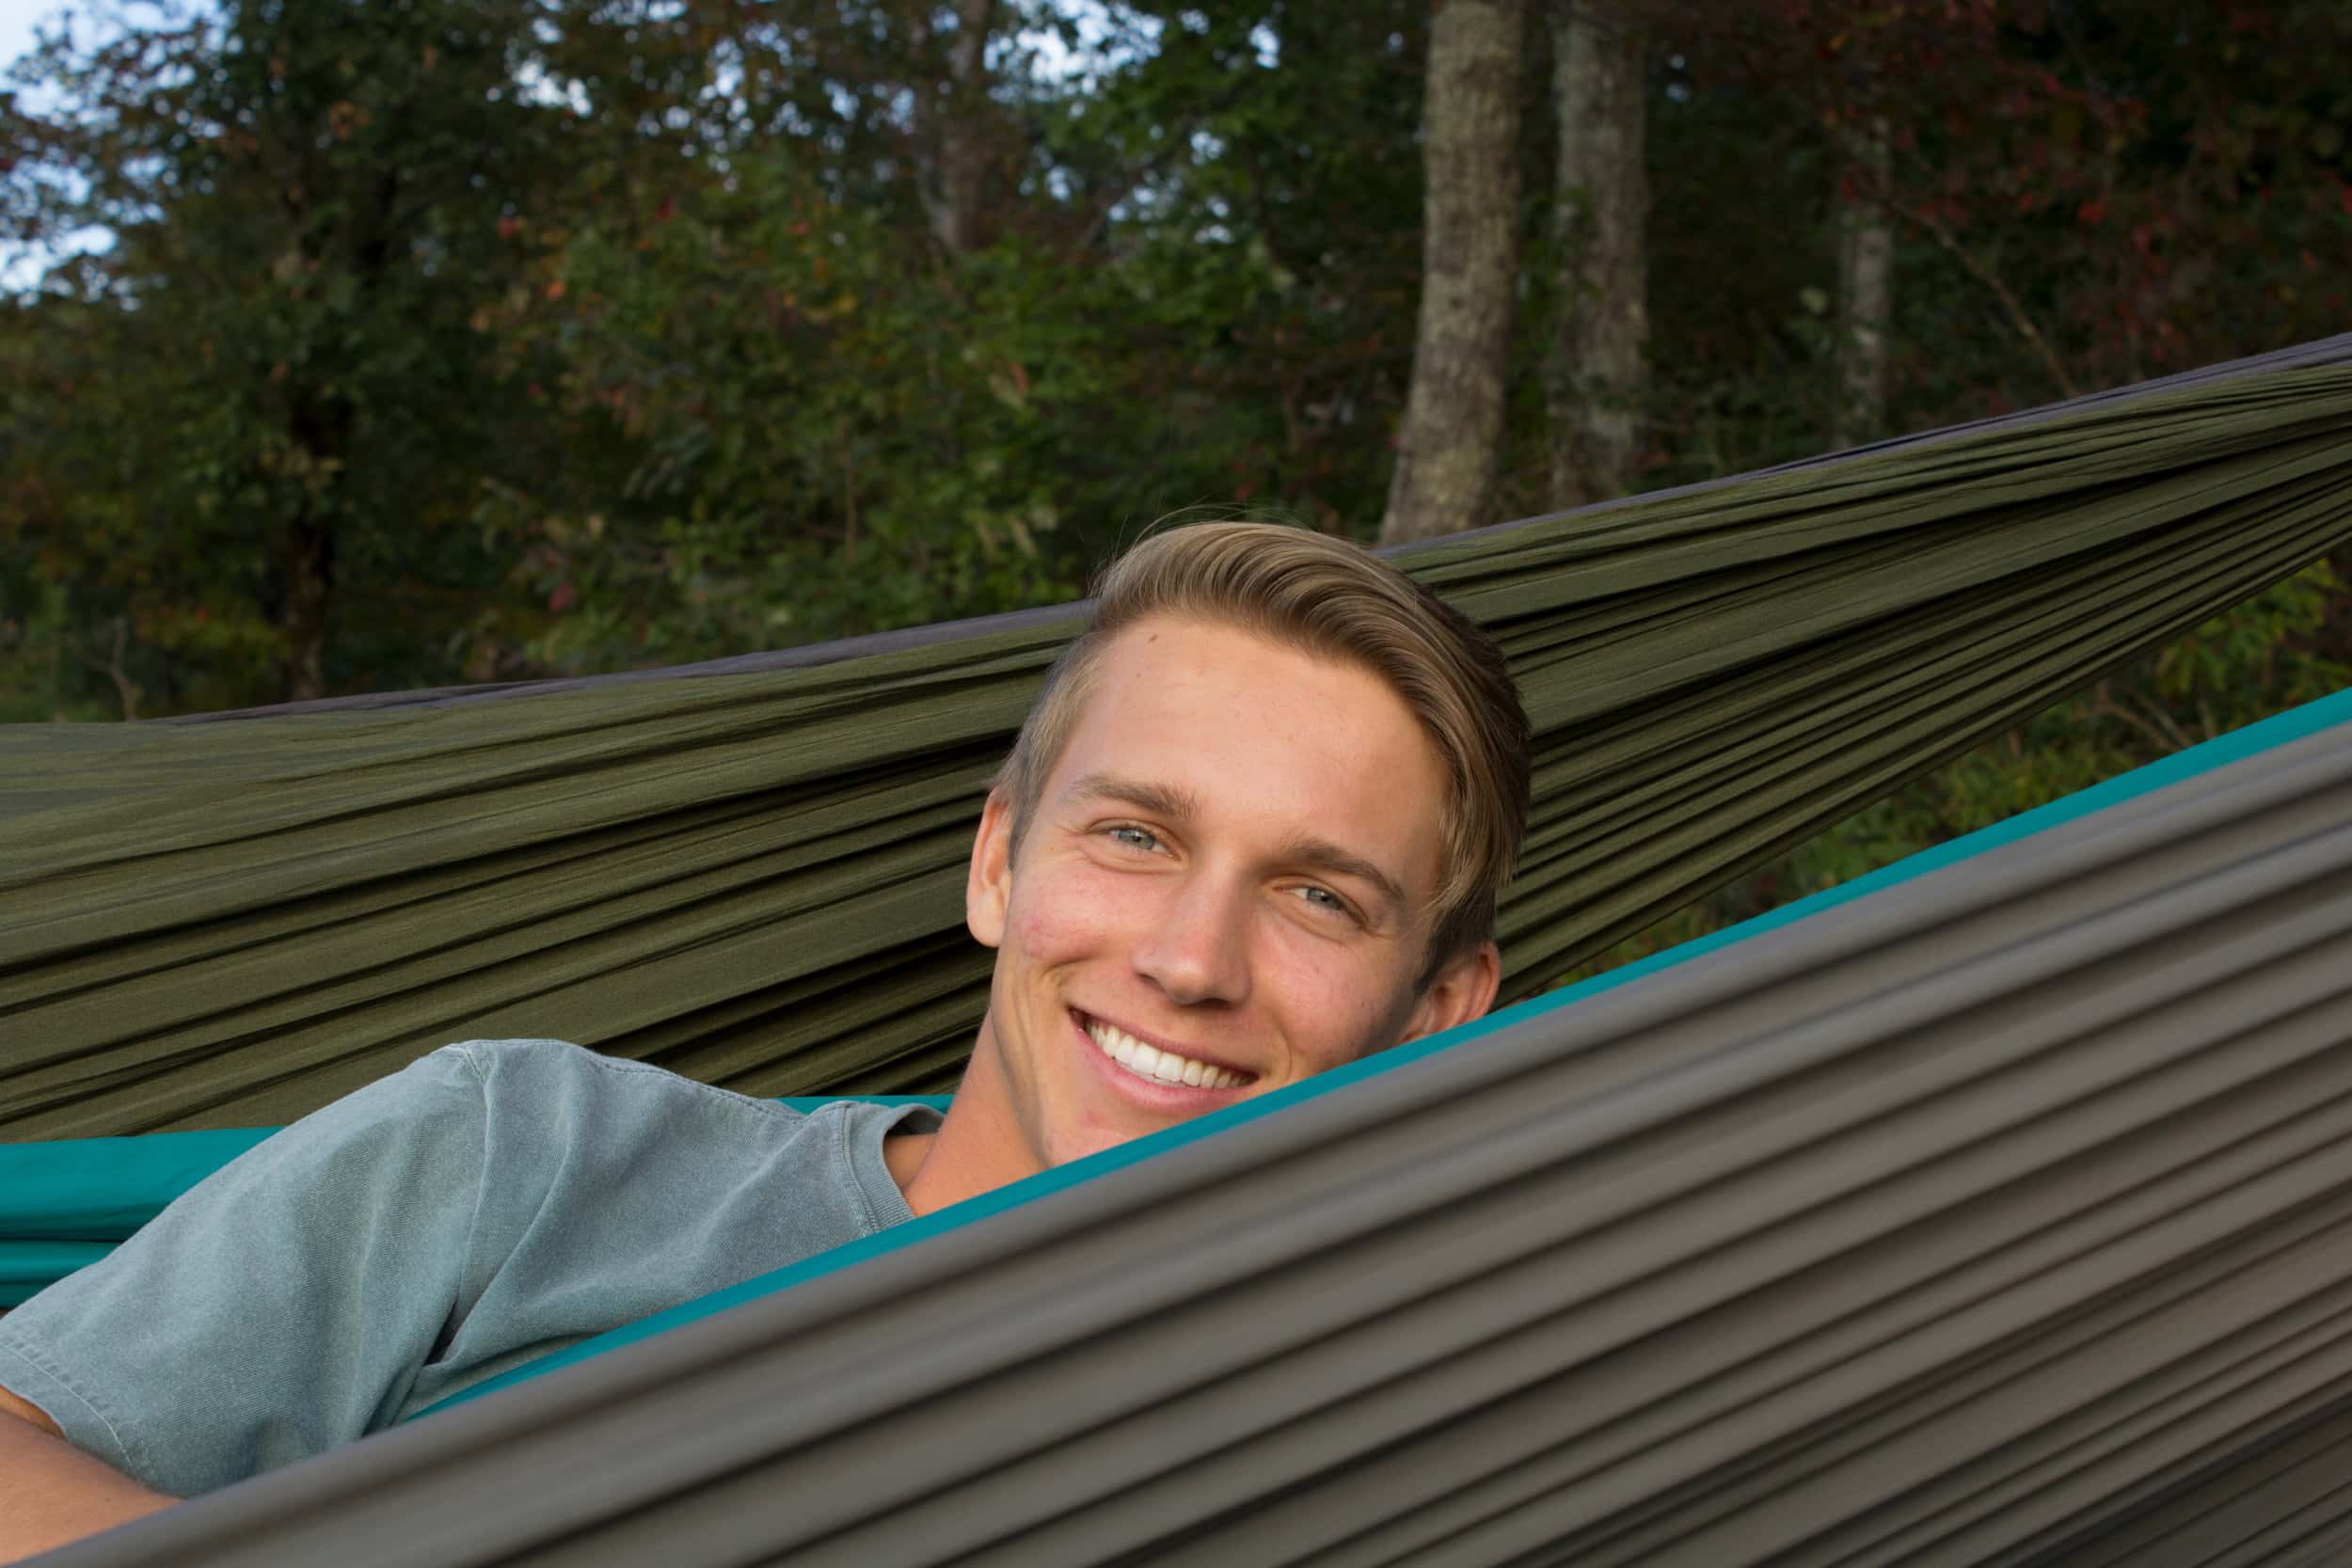 John Cole Floyd takes a break from studying in his ENO hammock.